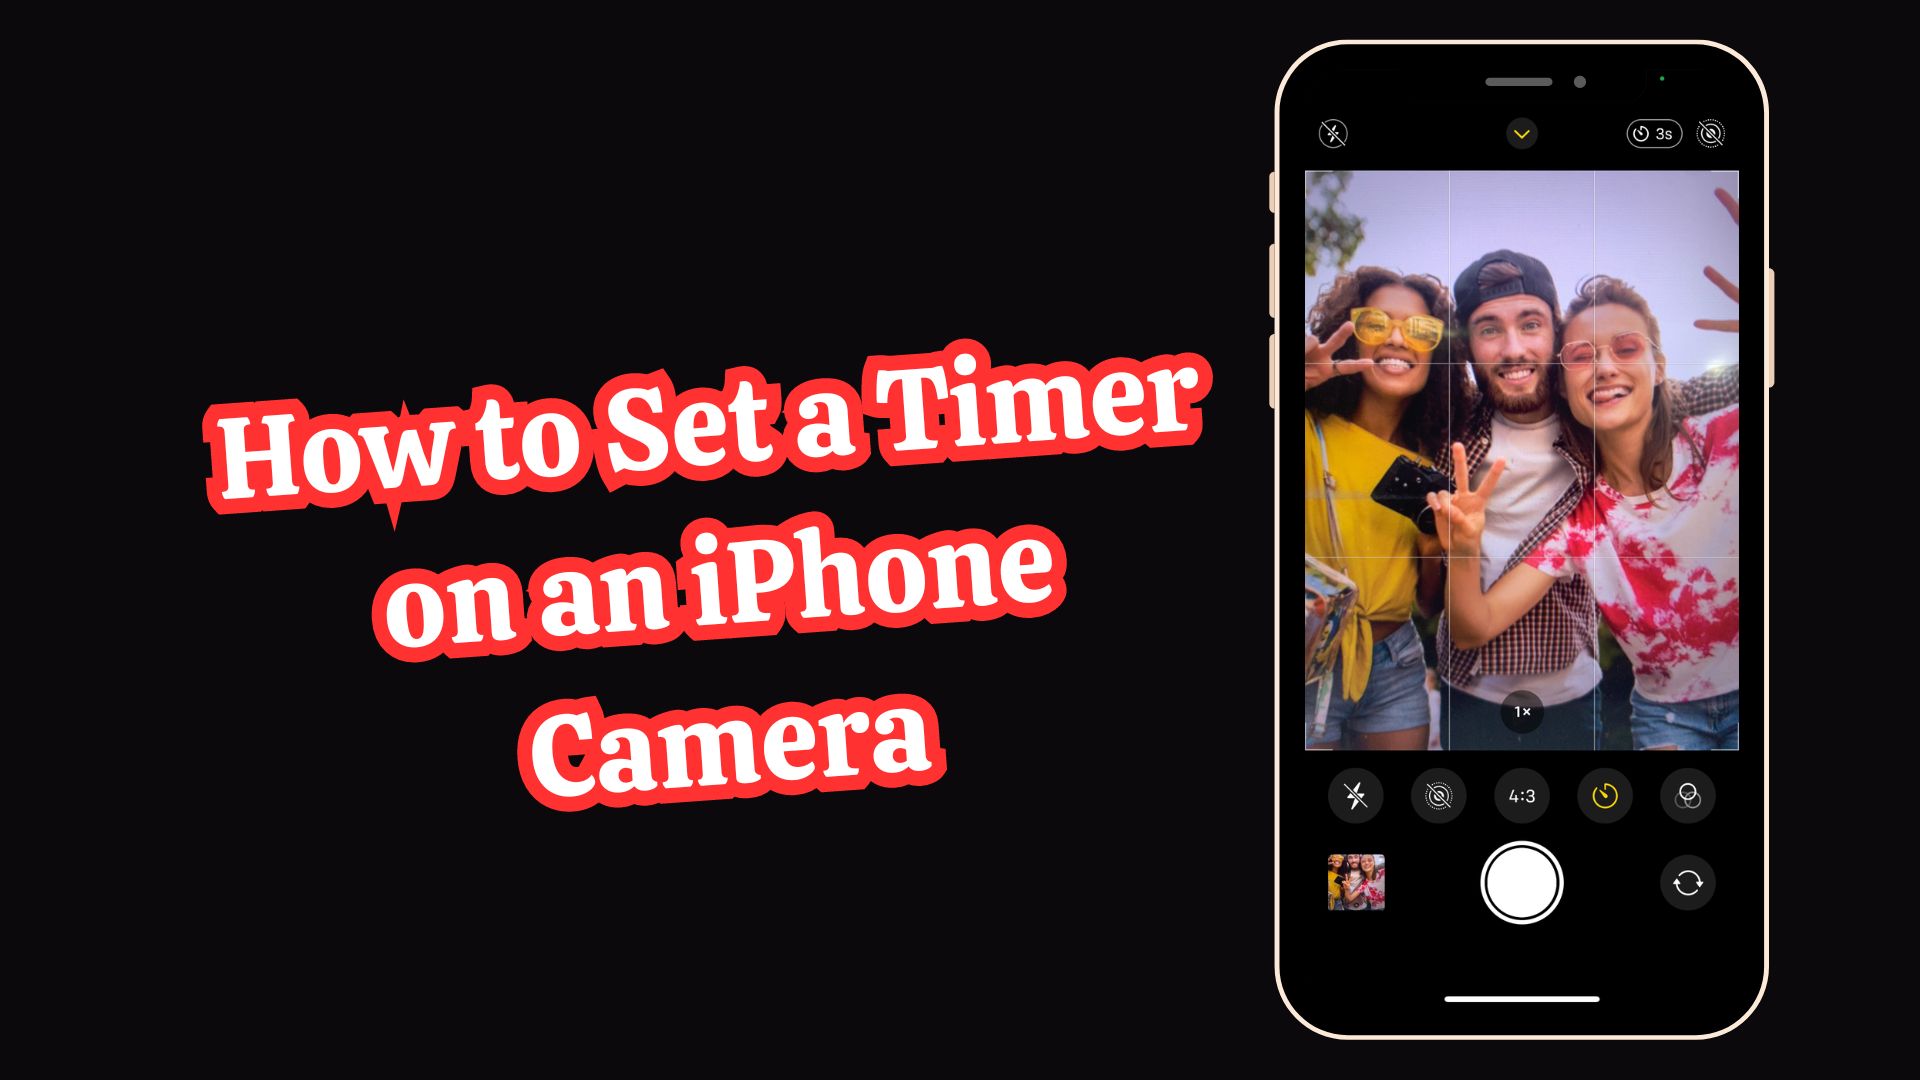 How to Set a Timer on an iPhone Camera